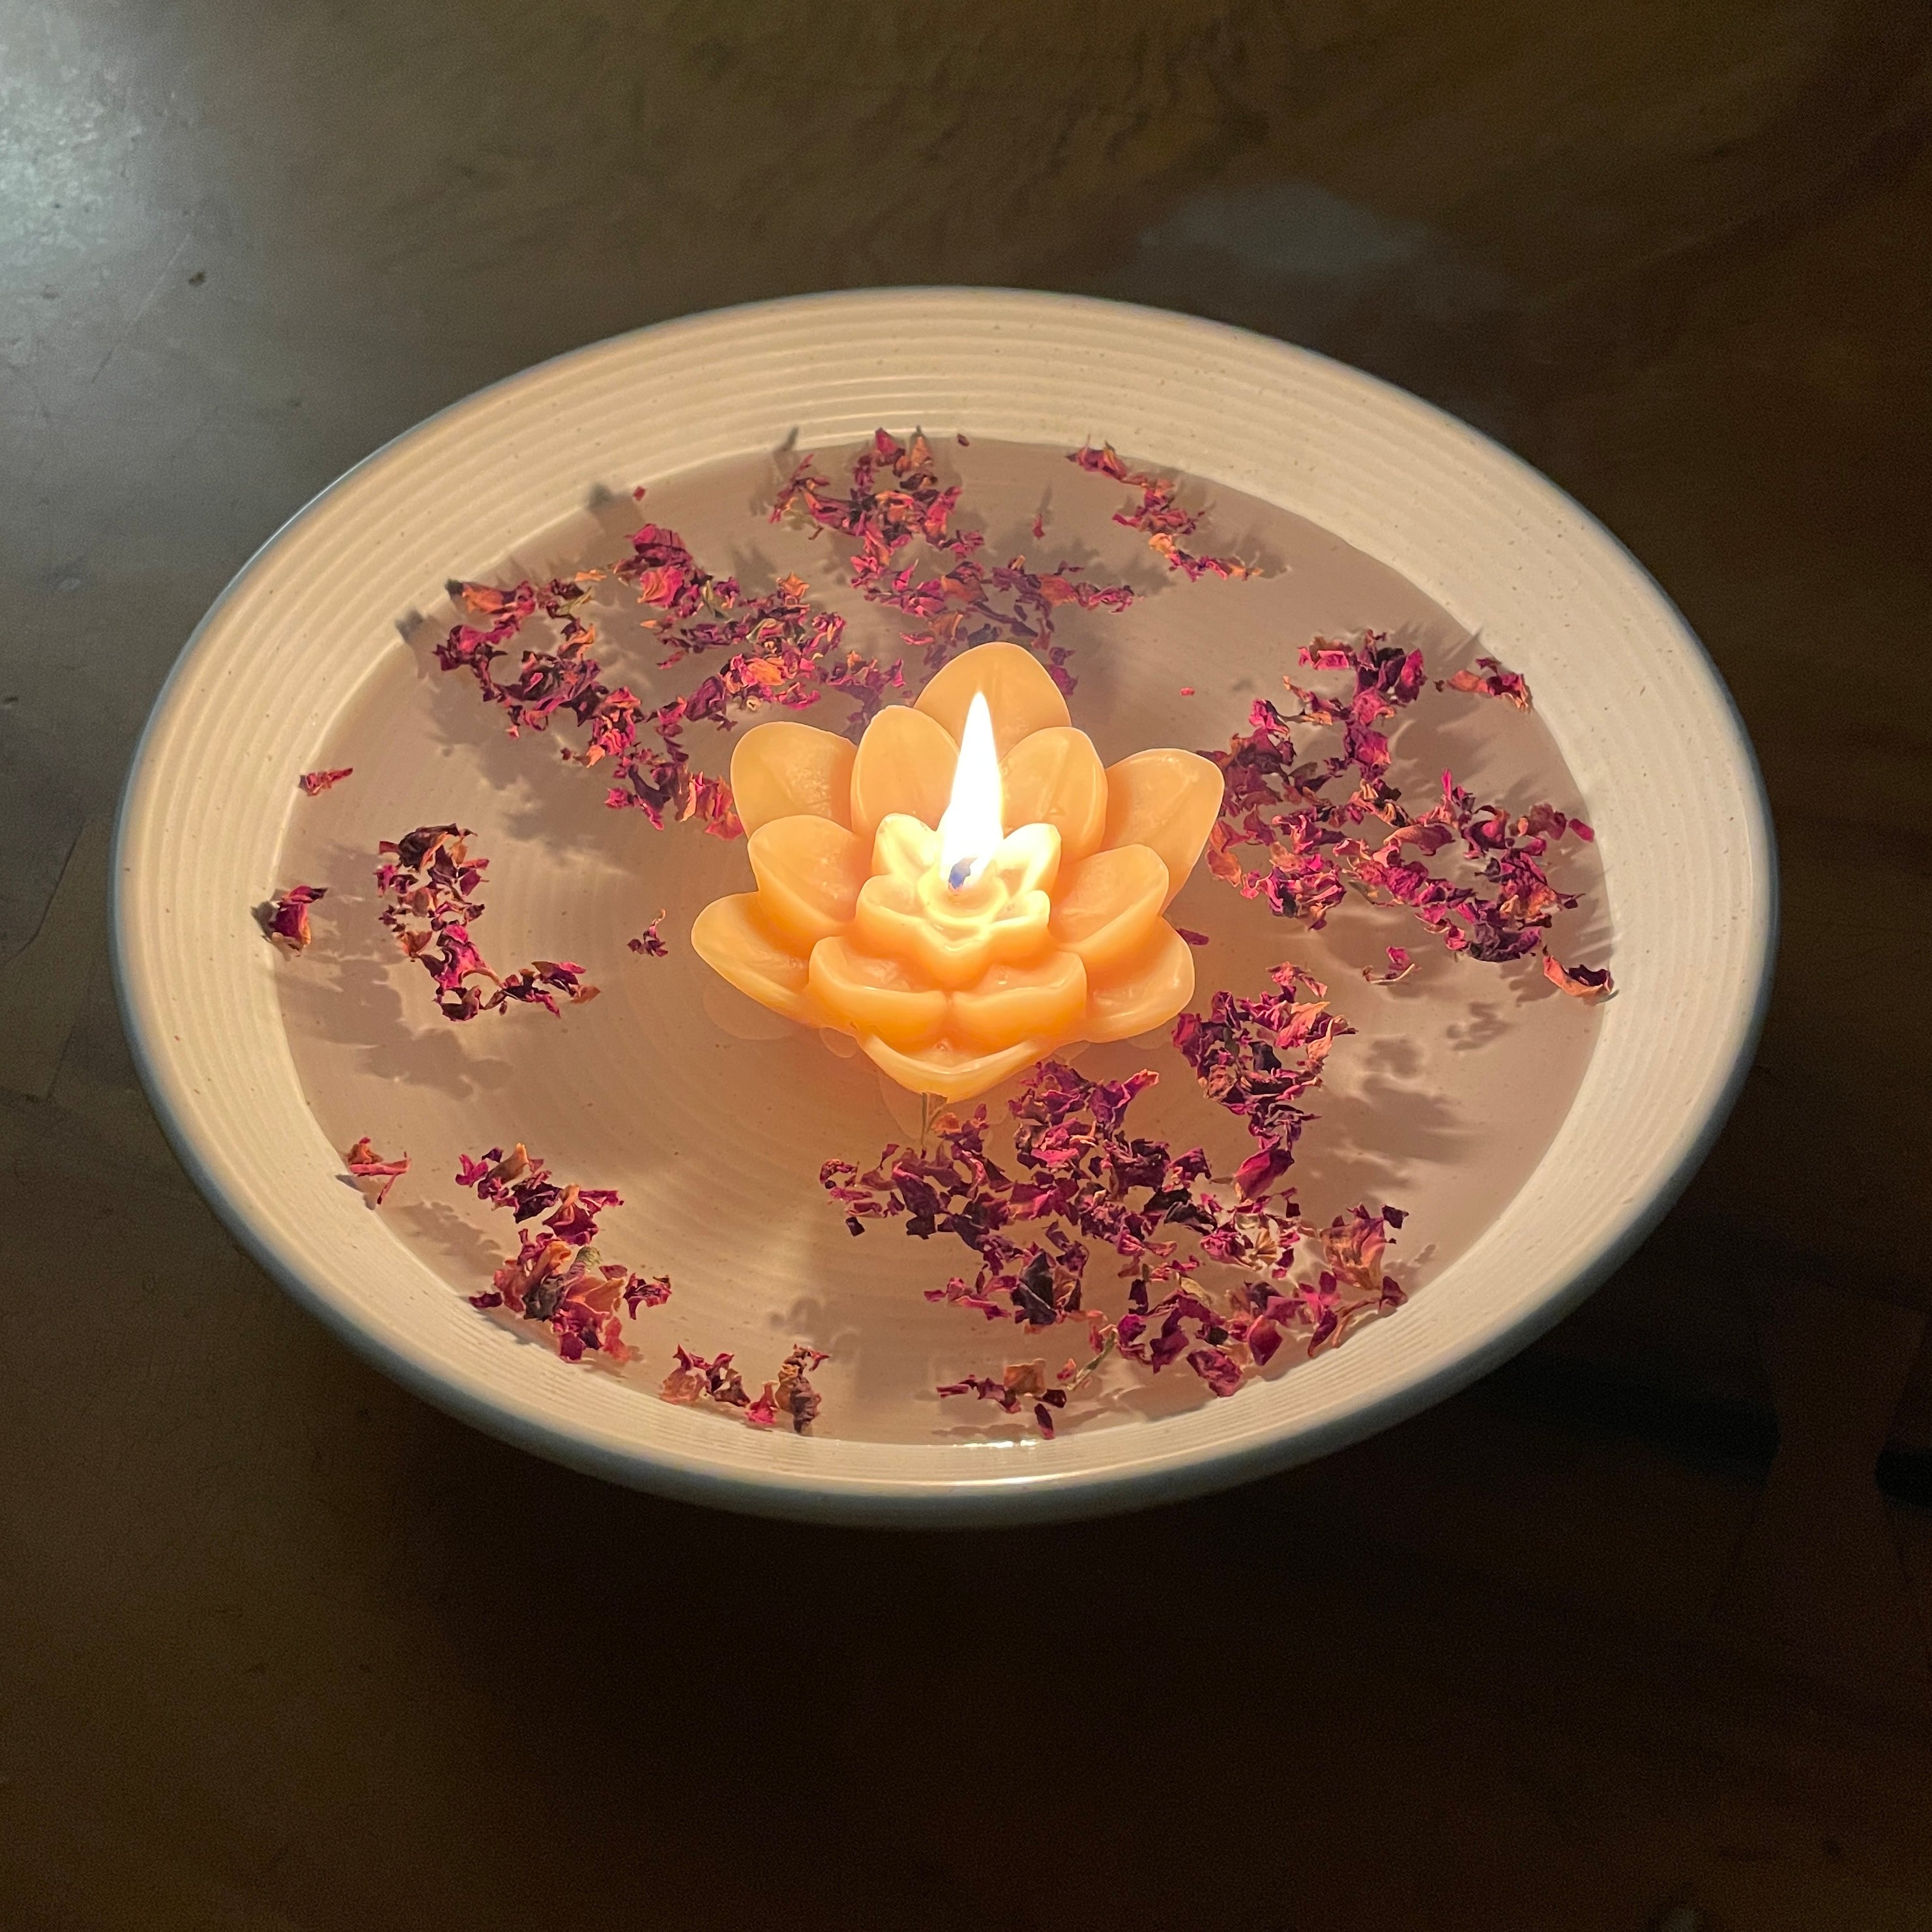 Floating bees wax candles